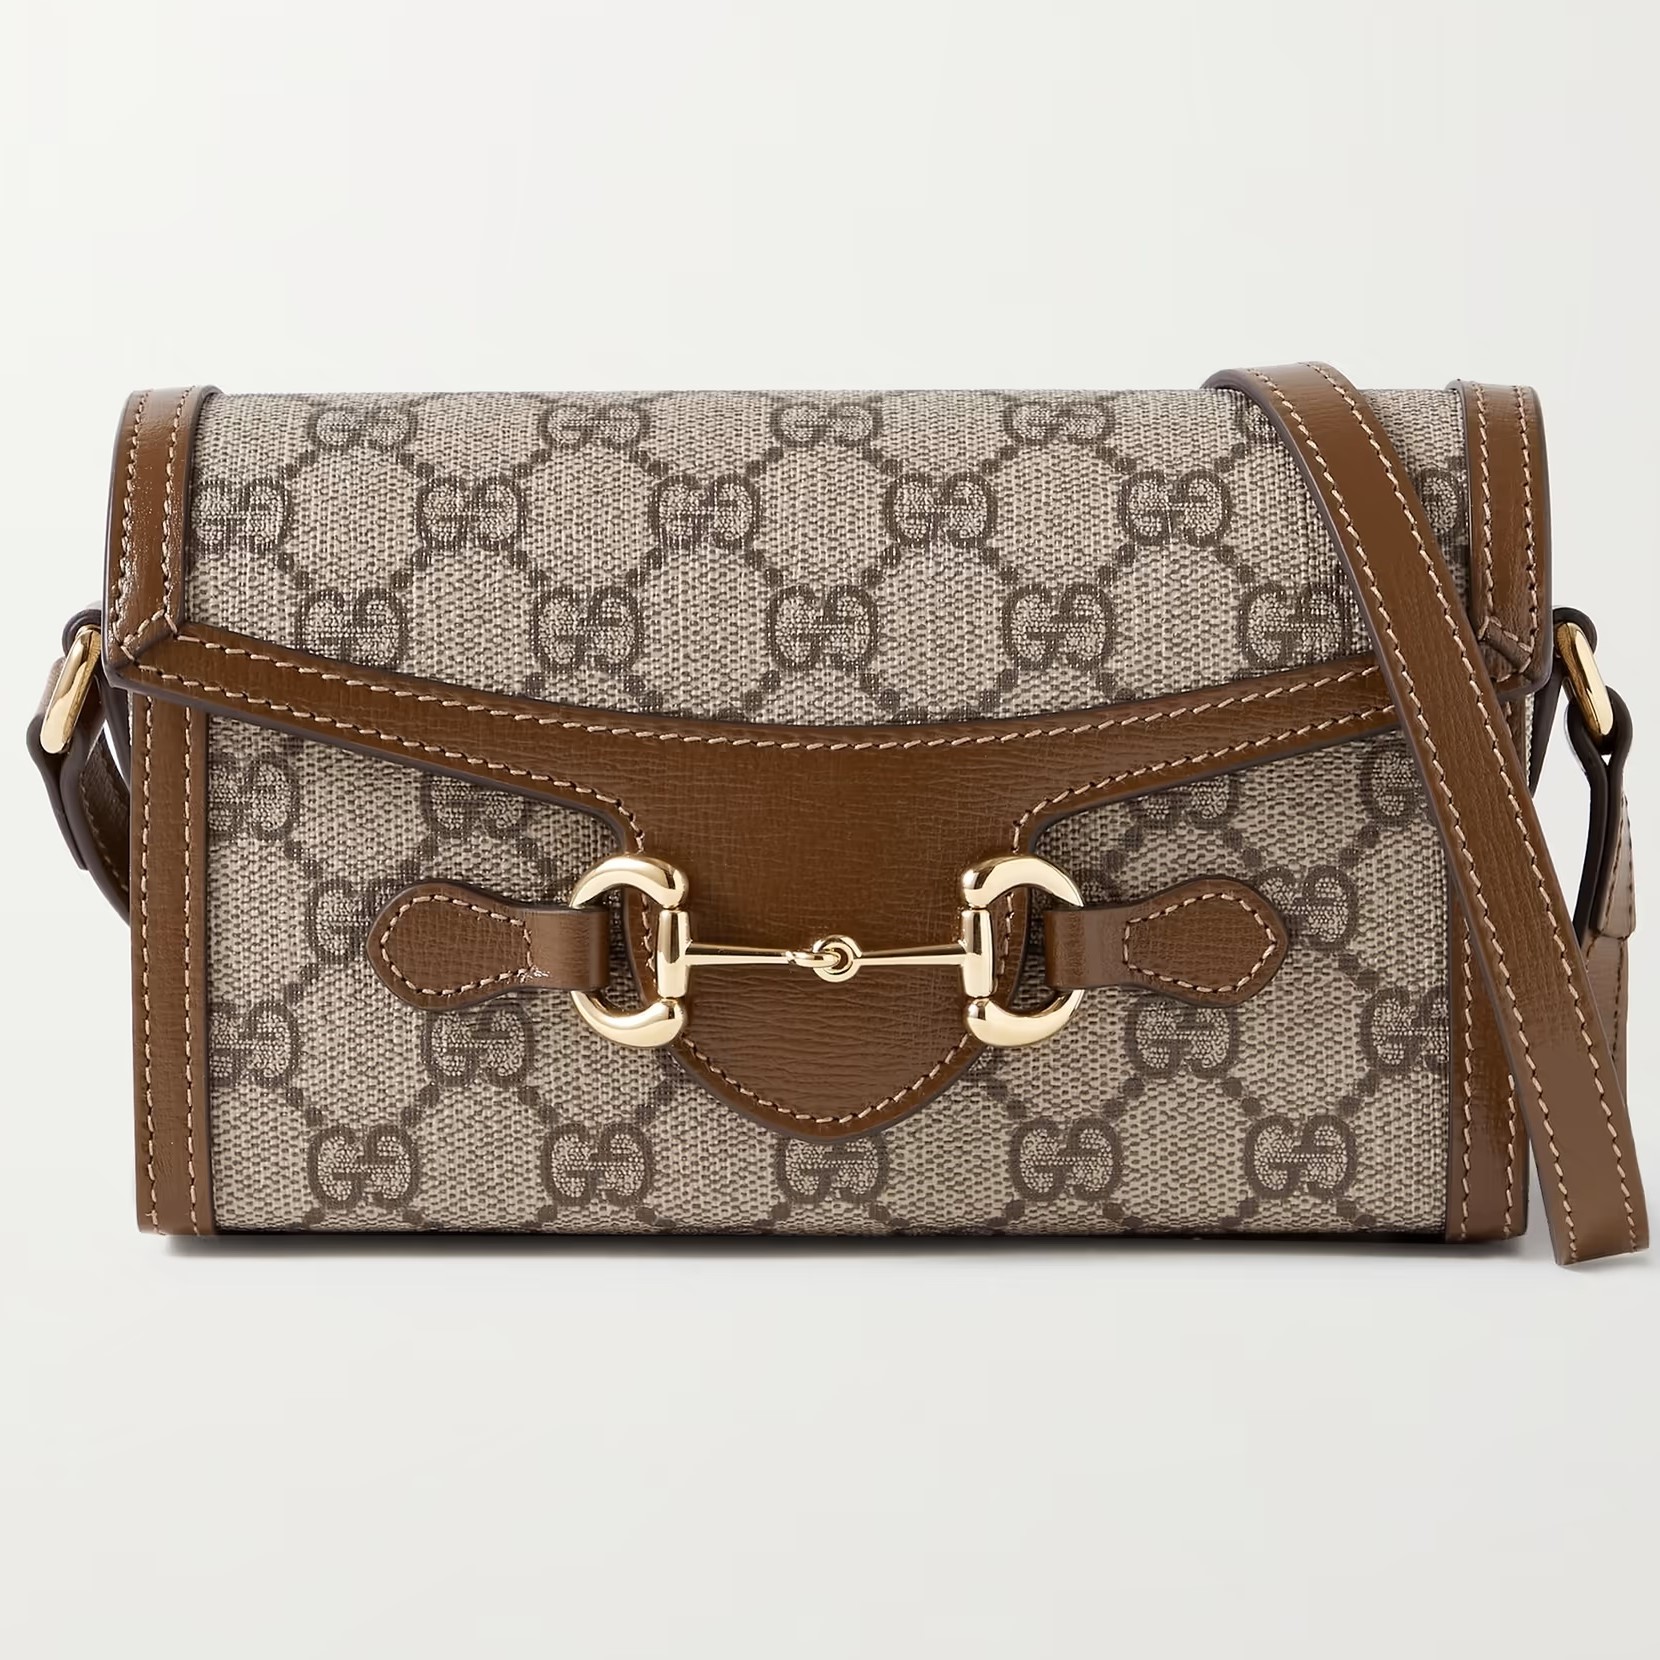 TÚI XÁCH NỮ GUCCI HORSEBIT 1955 BROWN LEATHER TRIMMED PRINTED COATED CANVAS SHOULDER BAG 3